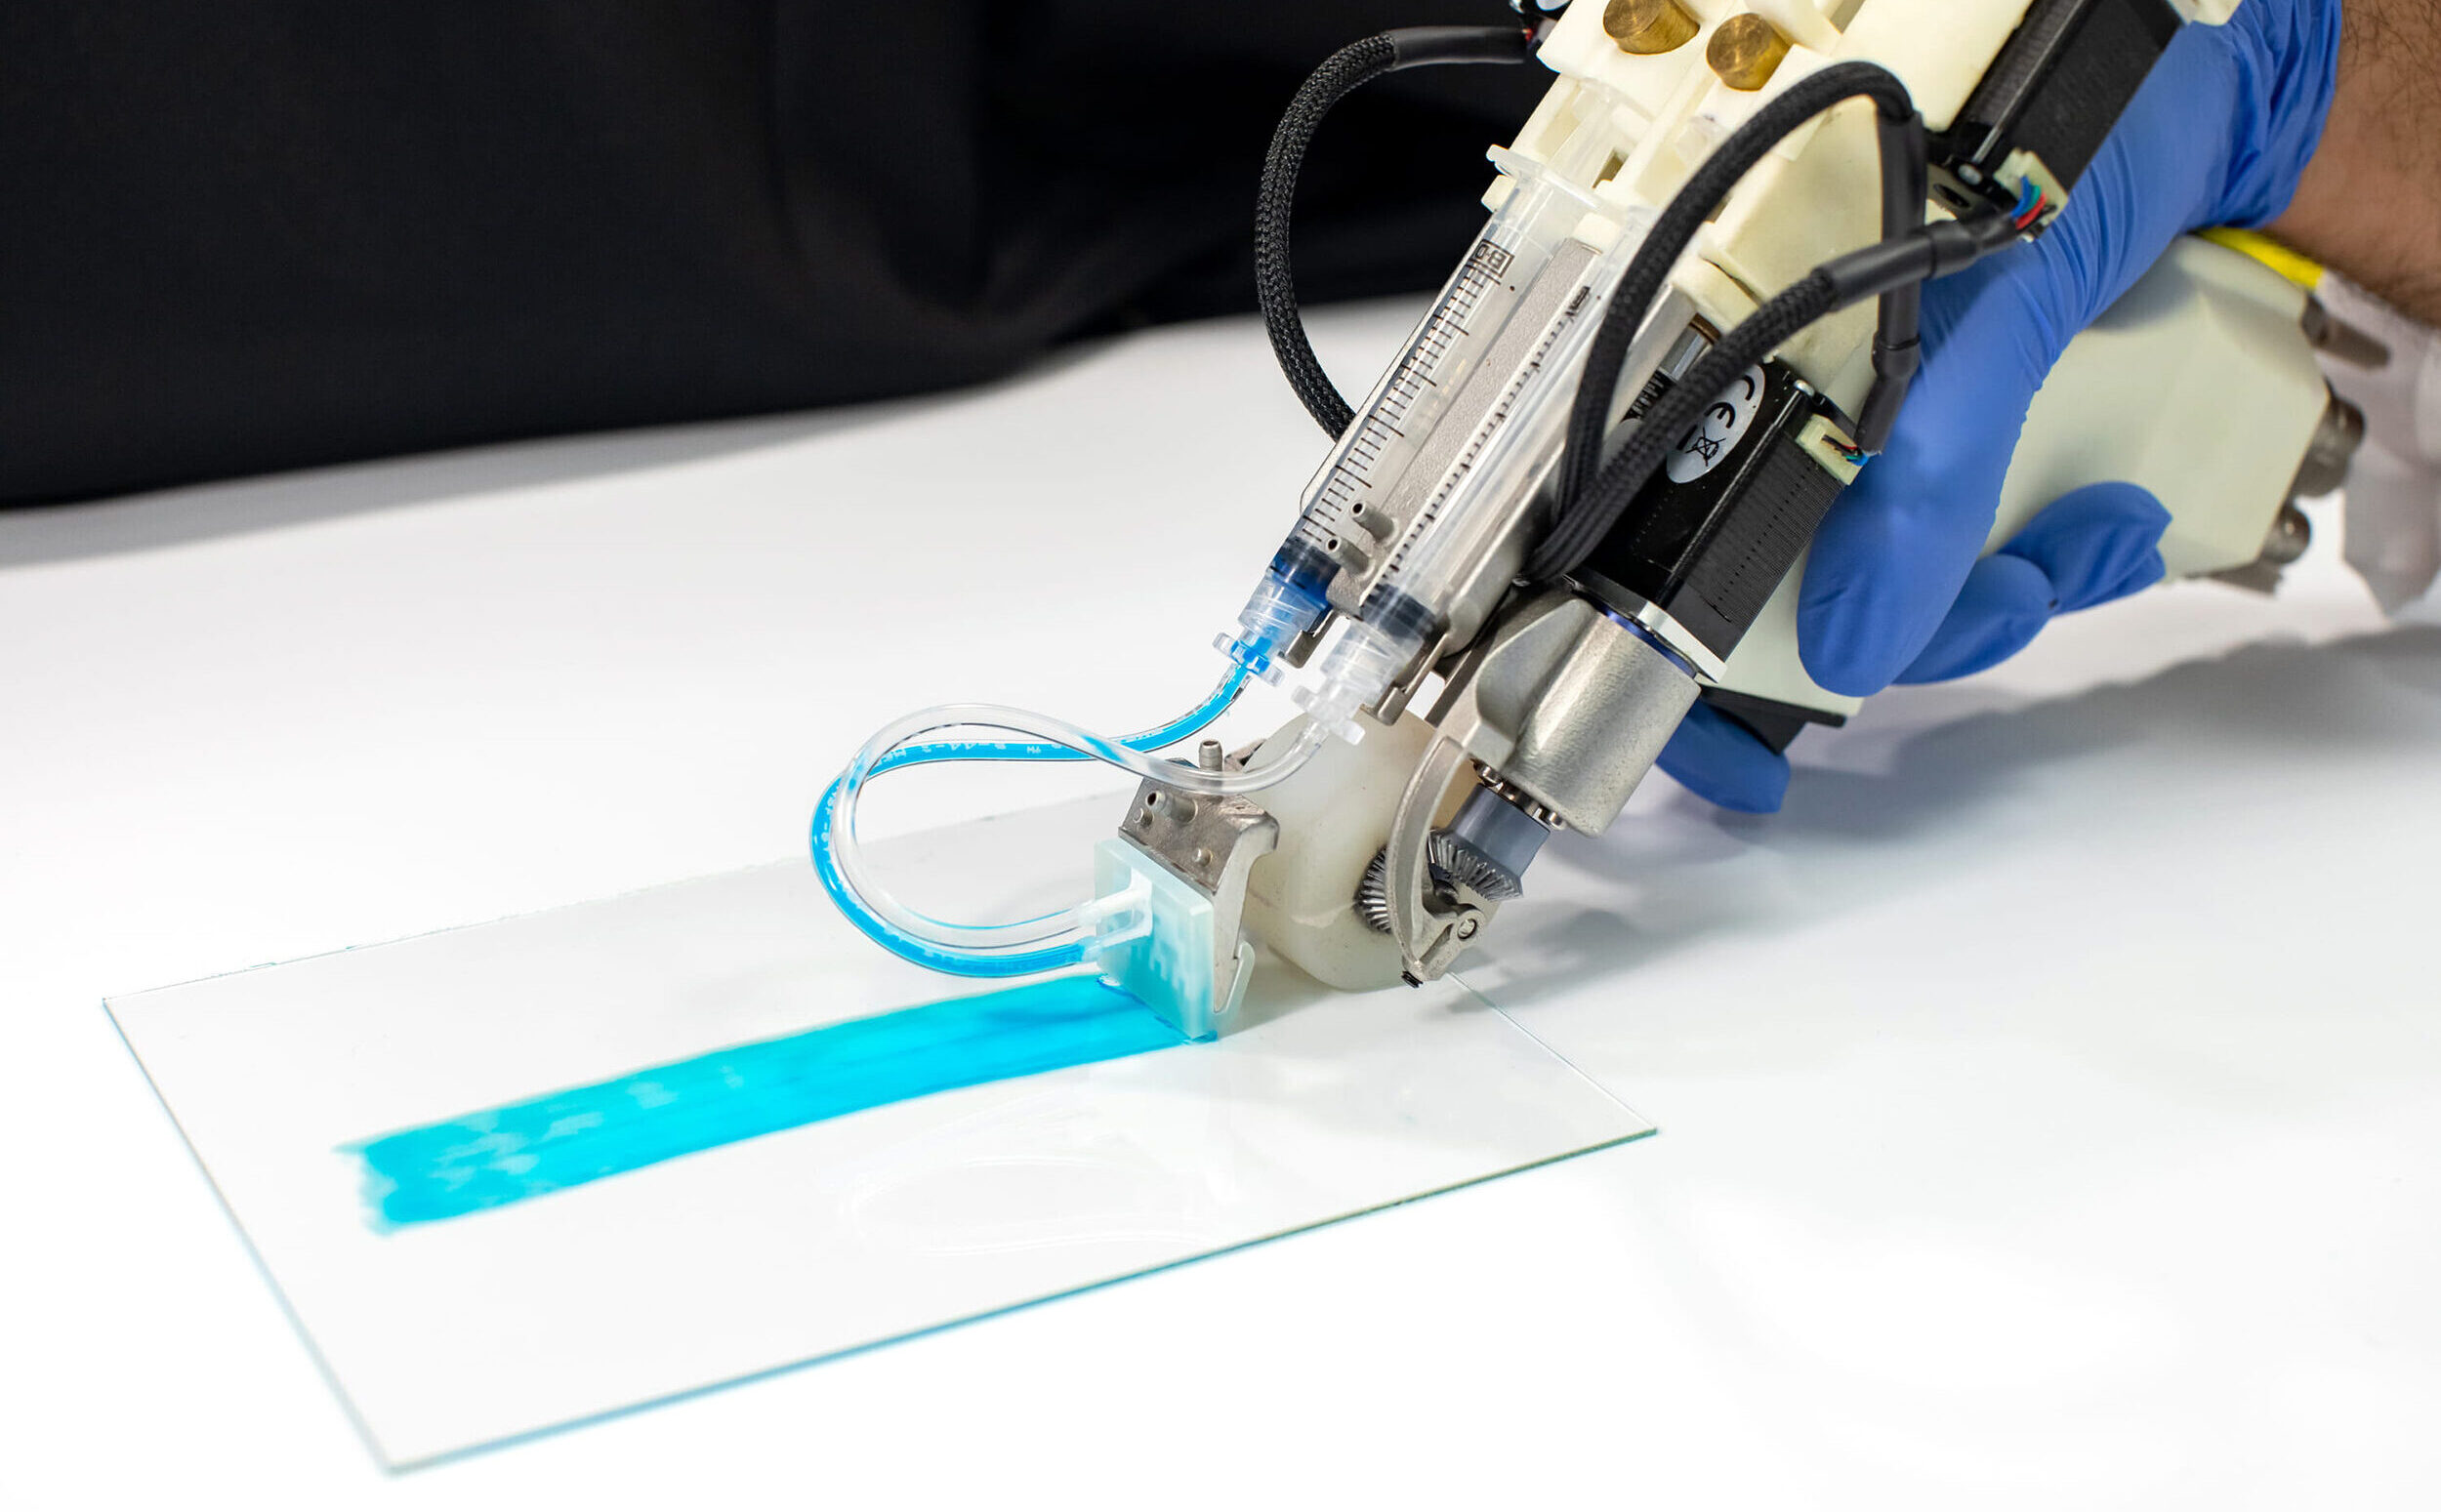 A device with a small roller applies a blue liquid along a smooth, rectangular glass surface